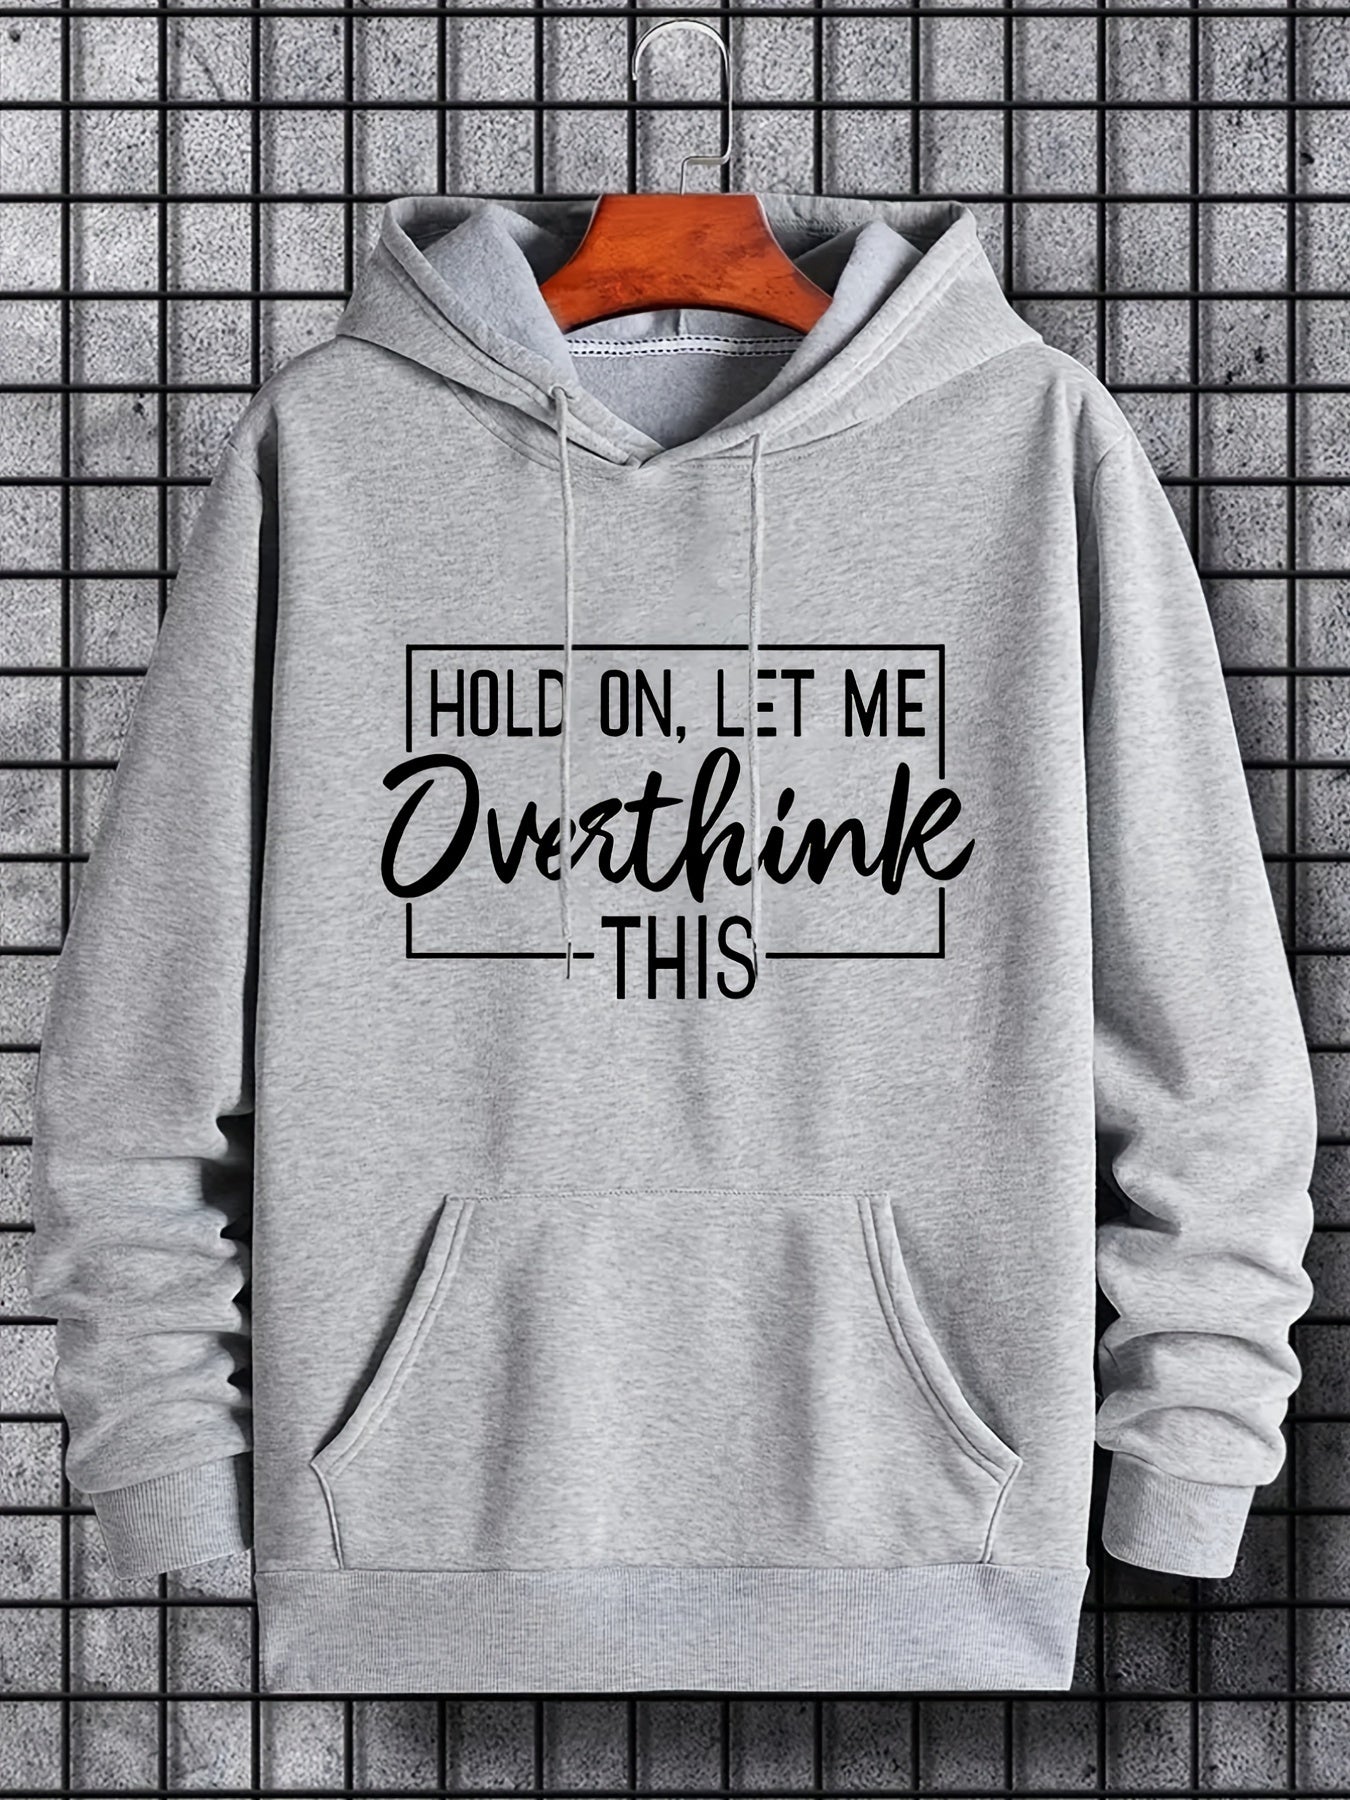 Hoodies For Men, Funny 'Overthink' Print Hoodie, Men's Casual Pullover Hooded Sweatshirt With Kangaroo Pocket For Spring Fall, As Gifts